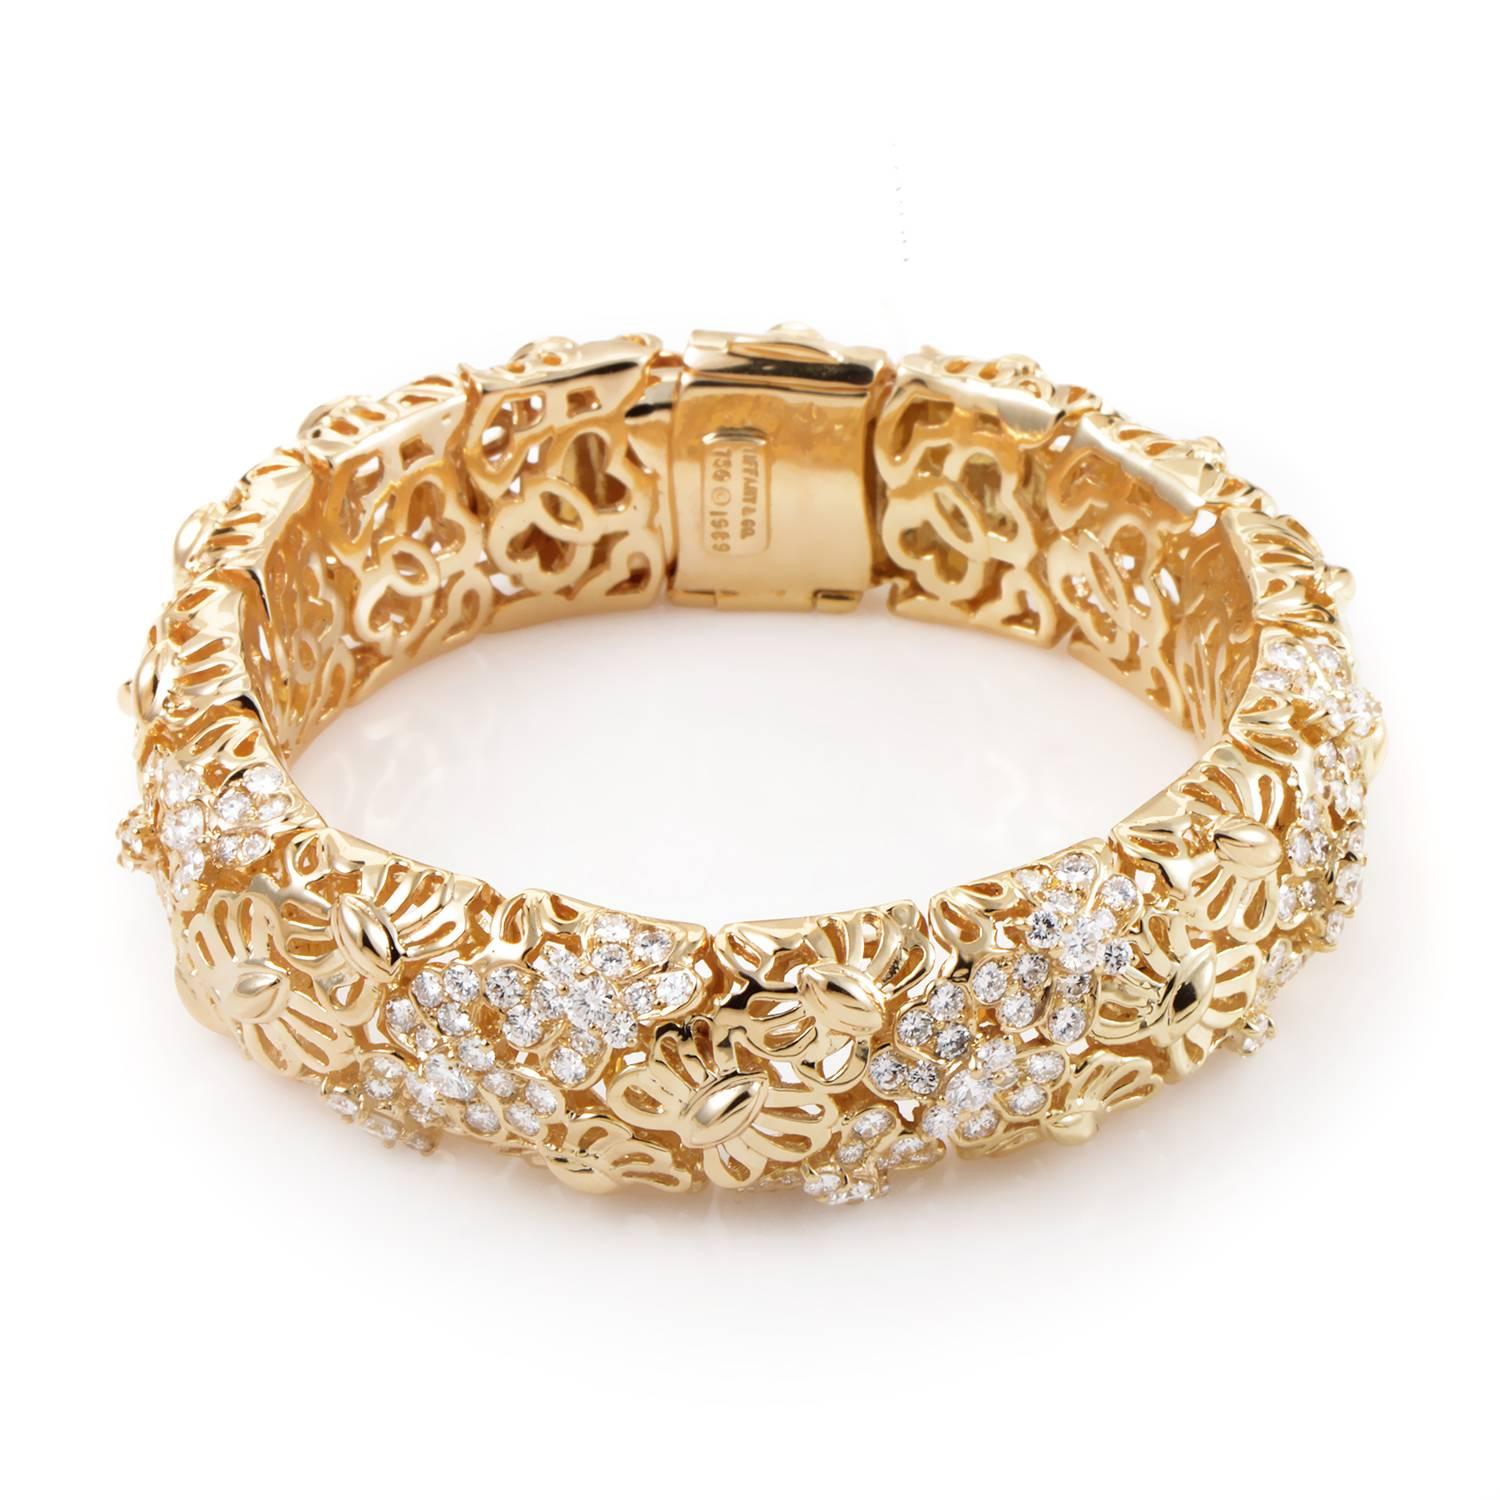 Festive and fabulous, this Tiffany & Co. bracelet is sure to please! The bracelet boasts an intricate design forged from 18K yellow gold and set with white diamonds. This beautiful bracelet can be bought individually or as part of a set. Please